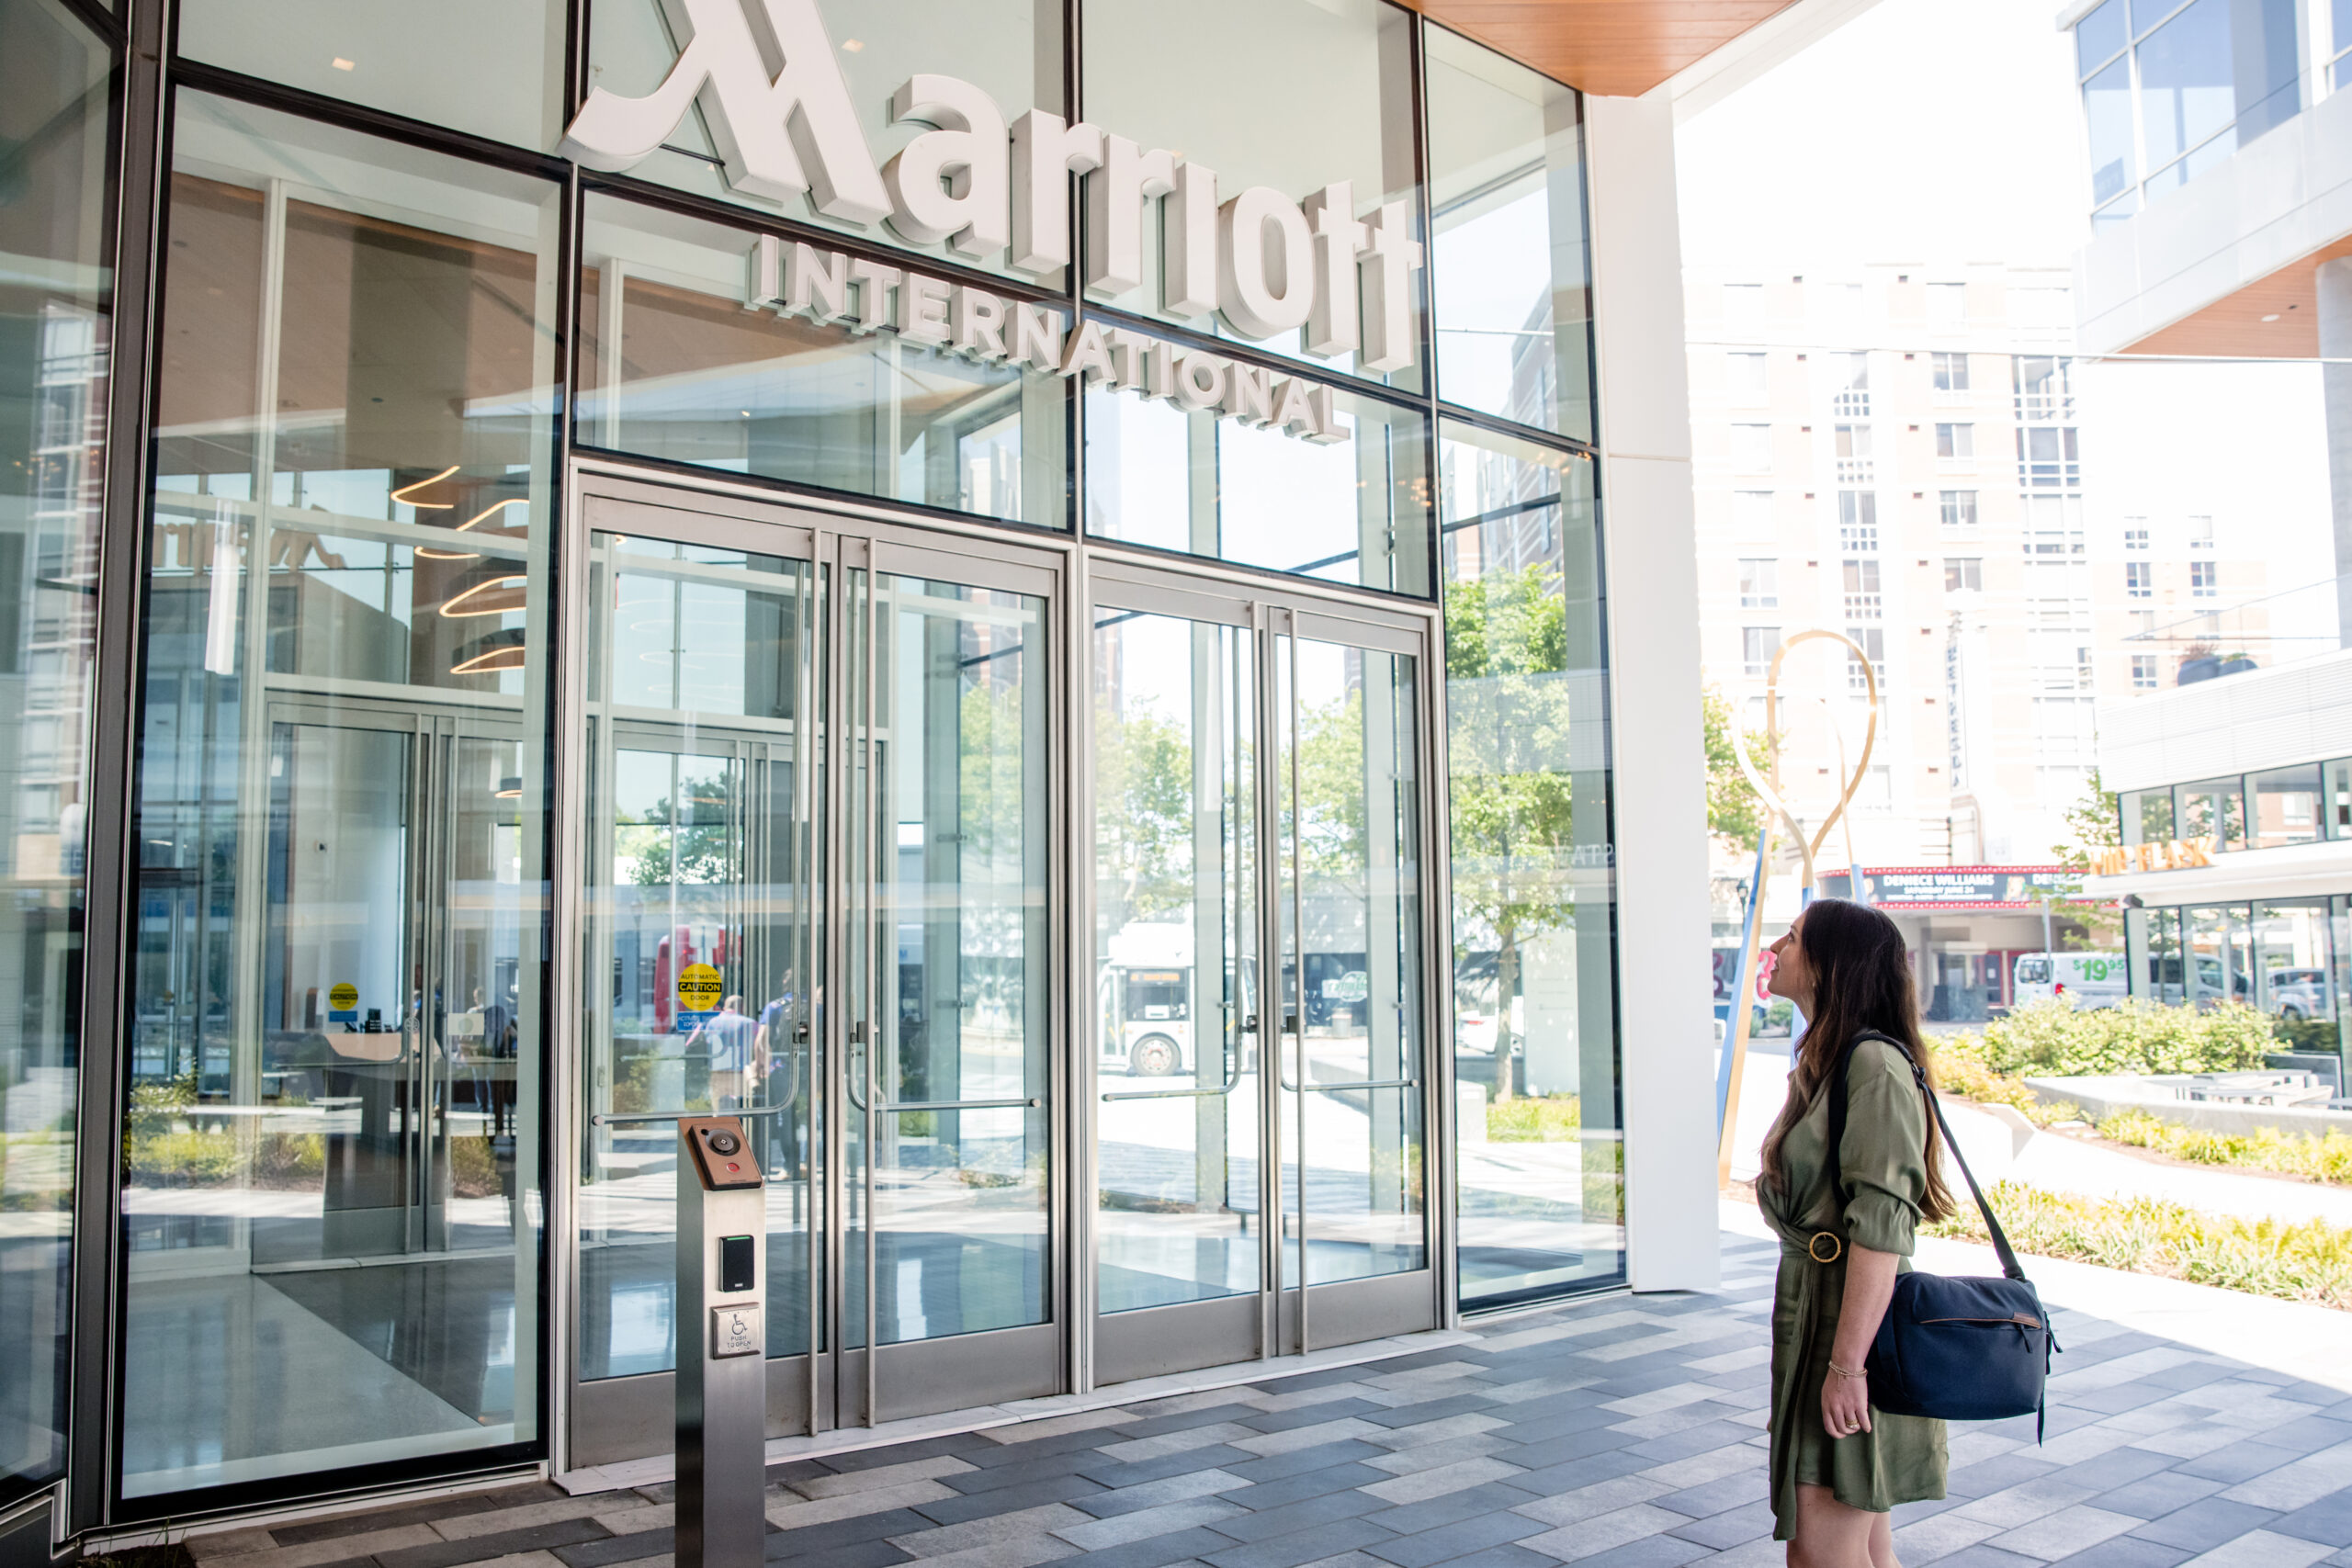 associate looking at the exterior of the marriott corporate headquarters building in downtown Bethesda, maryland